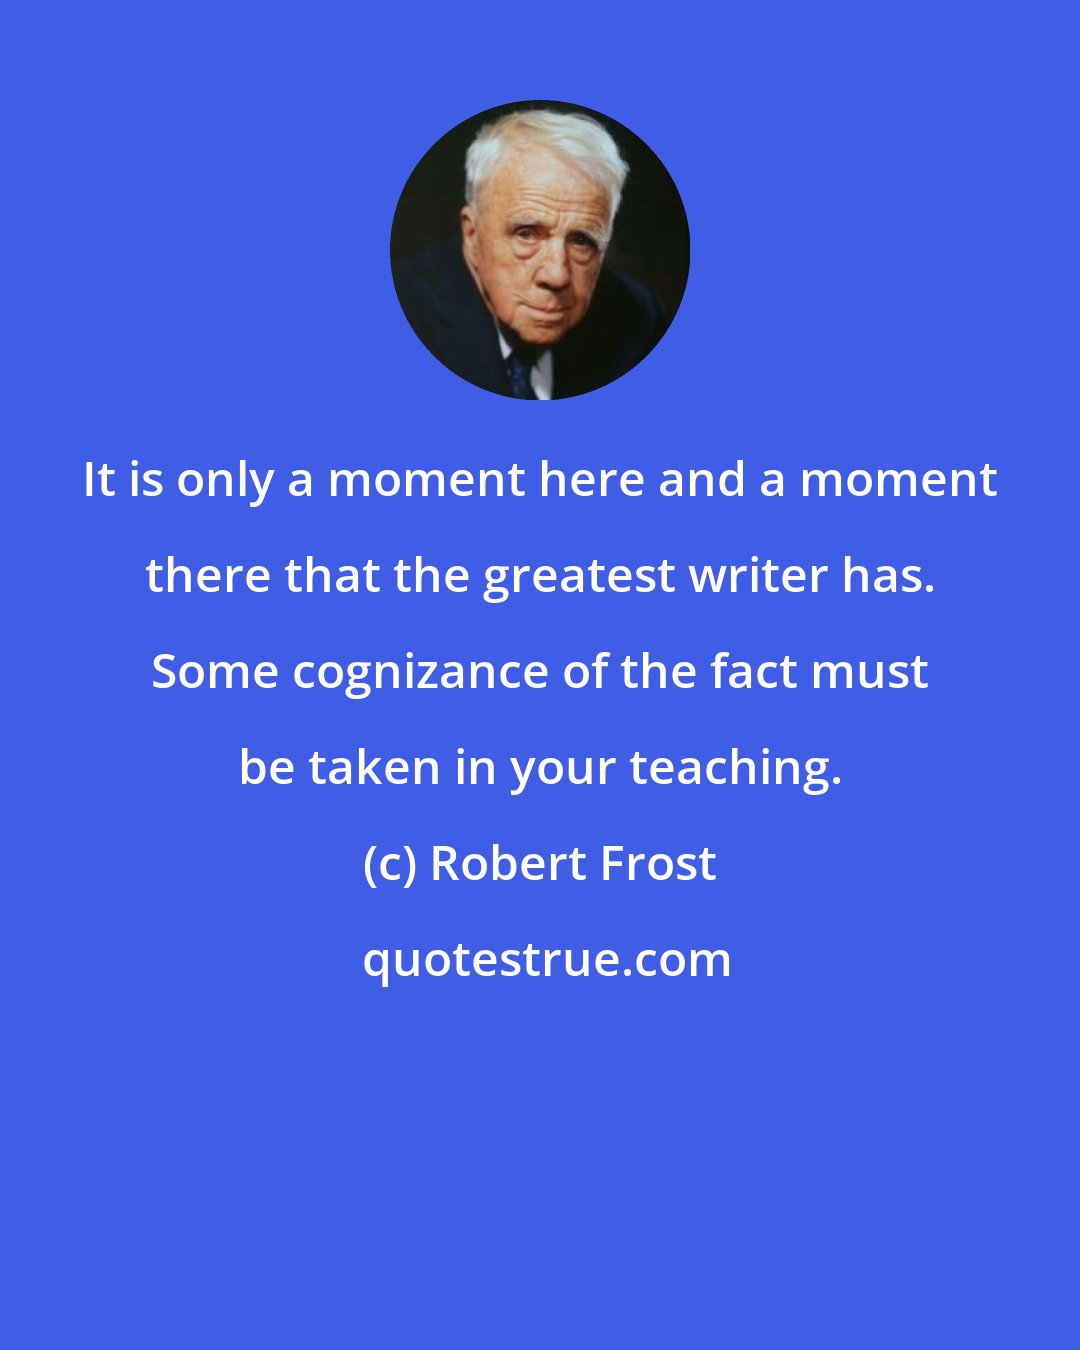 Robert Frost: It is only a moment here and a moment there that the greatest writer has. Some cognizance of the fact must be taken in your teaching.